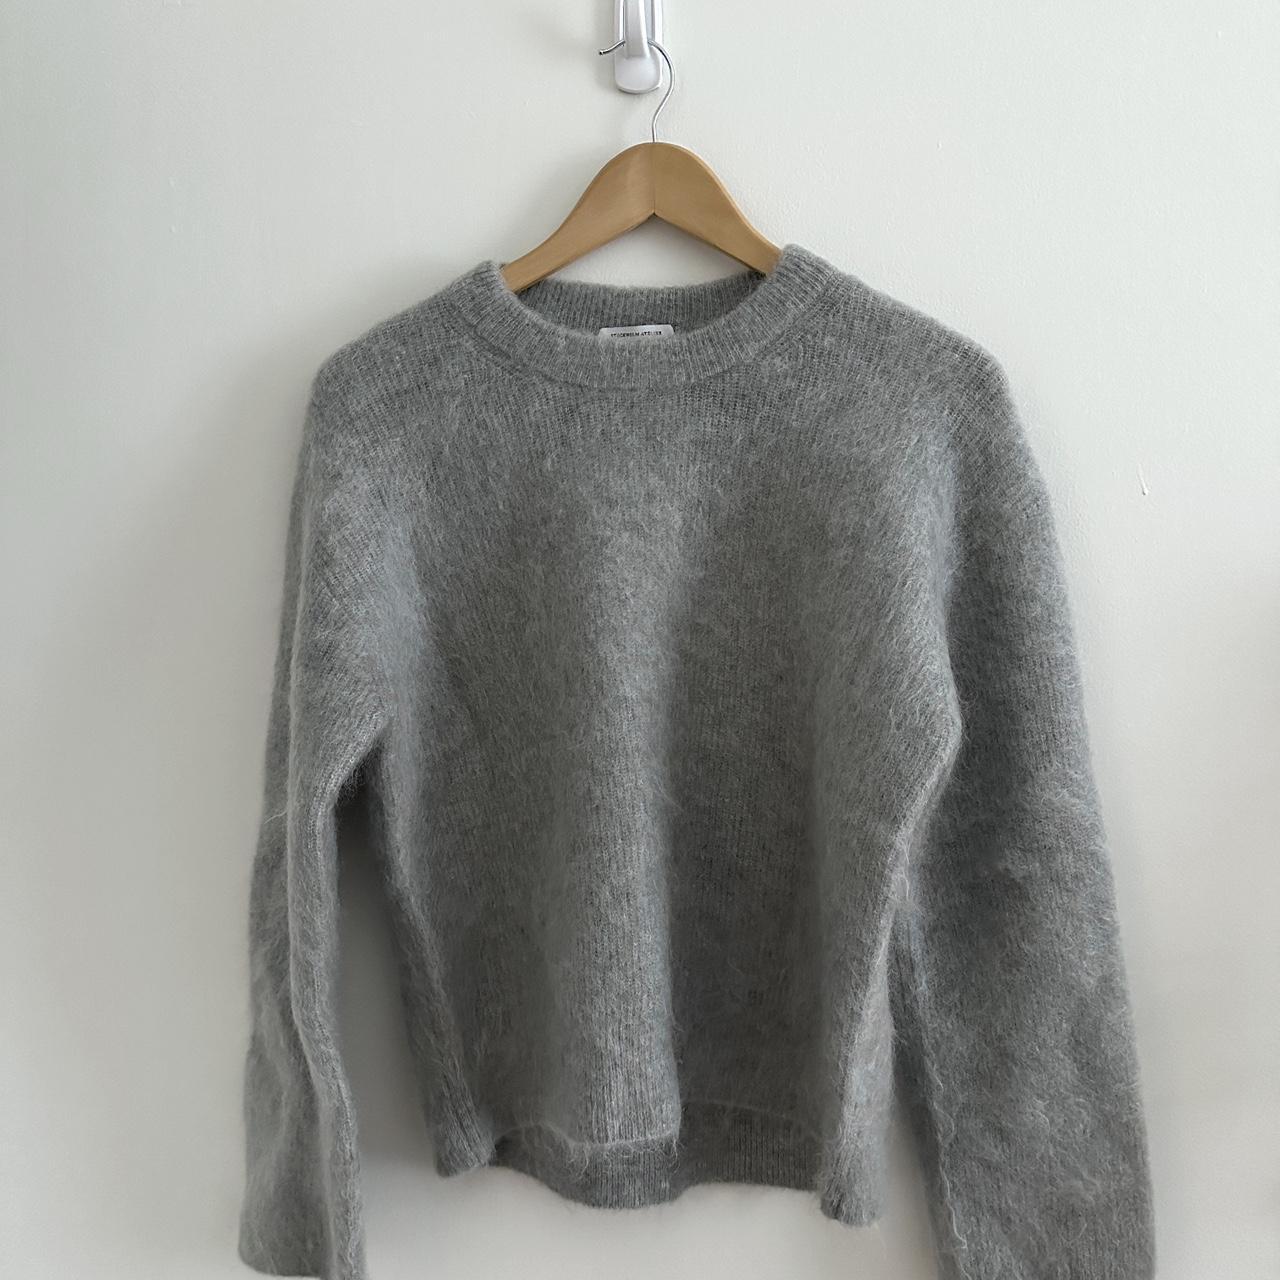 & Other Stories Fuzzy Knit Sweater in Size XS Color... - Depop